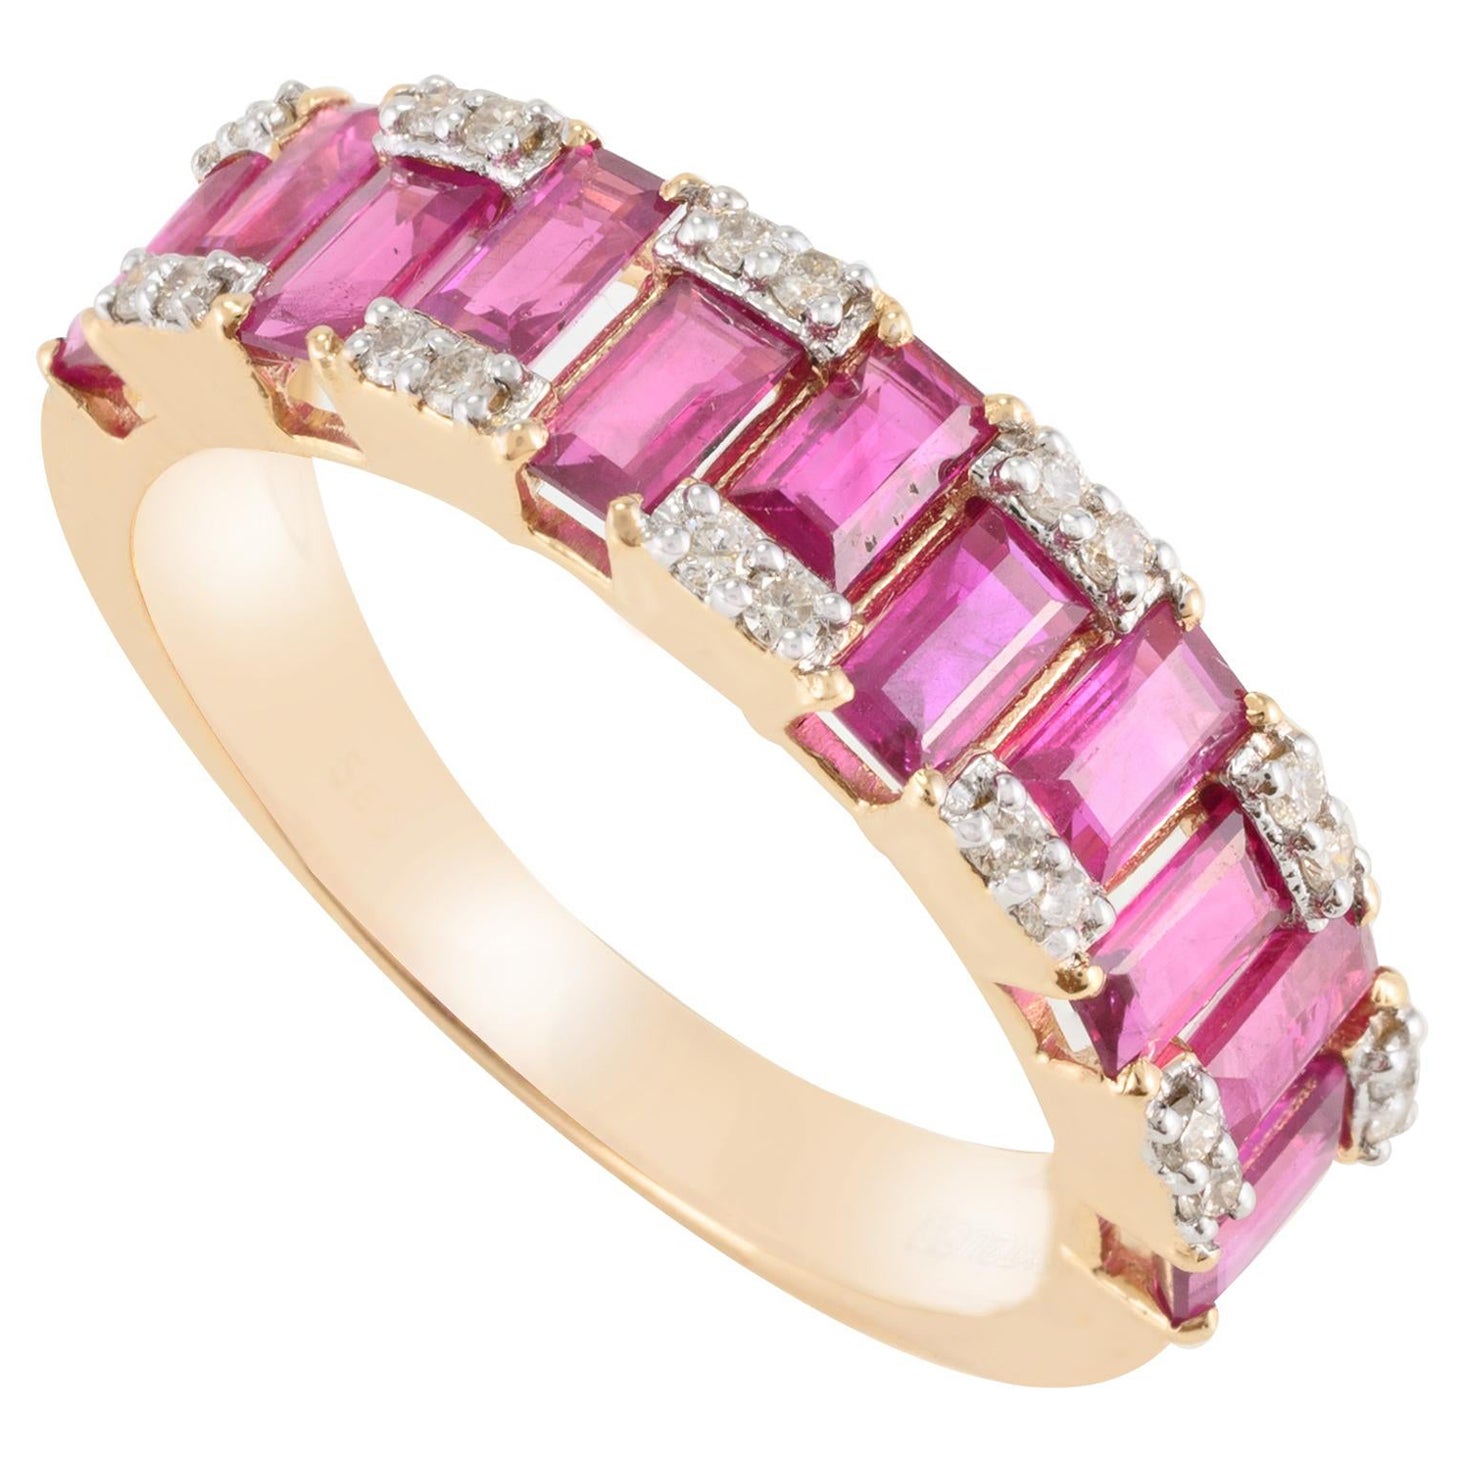 Real Ruby and Diamond Engagement Band Ring in 14k Solid Yellow Gold